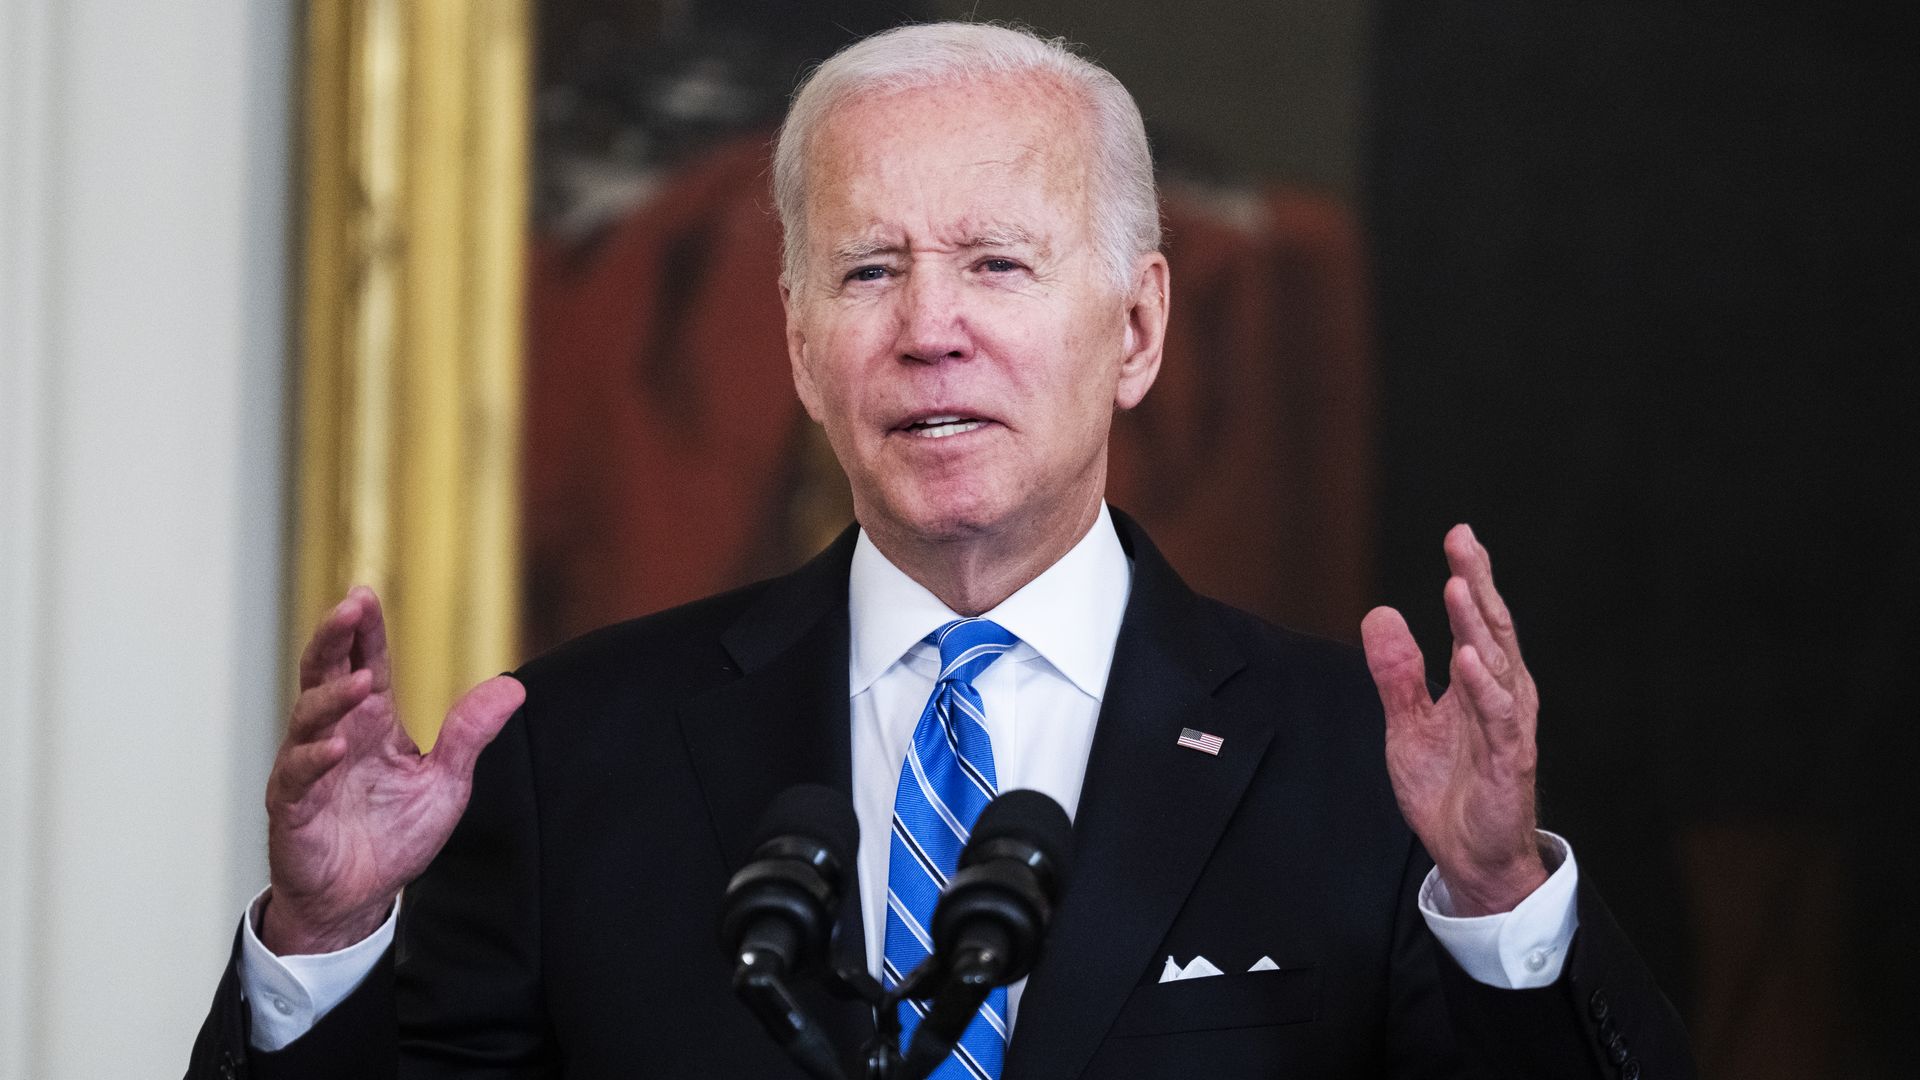 President Biden speaks during a ceremony at the White House.